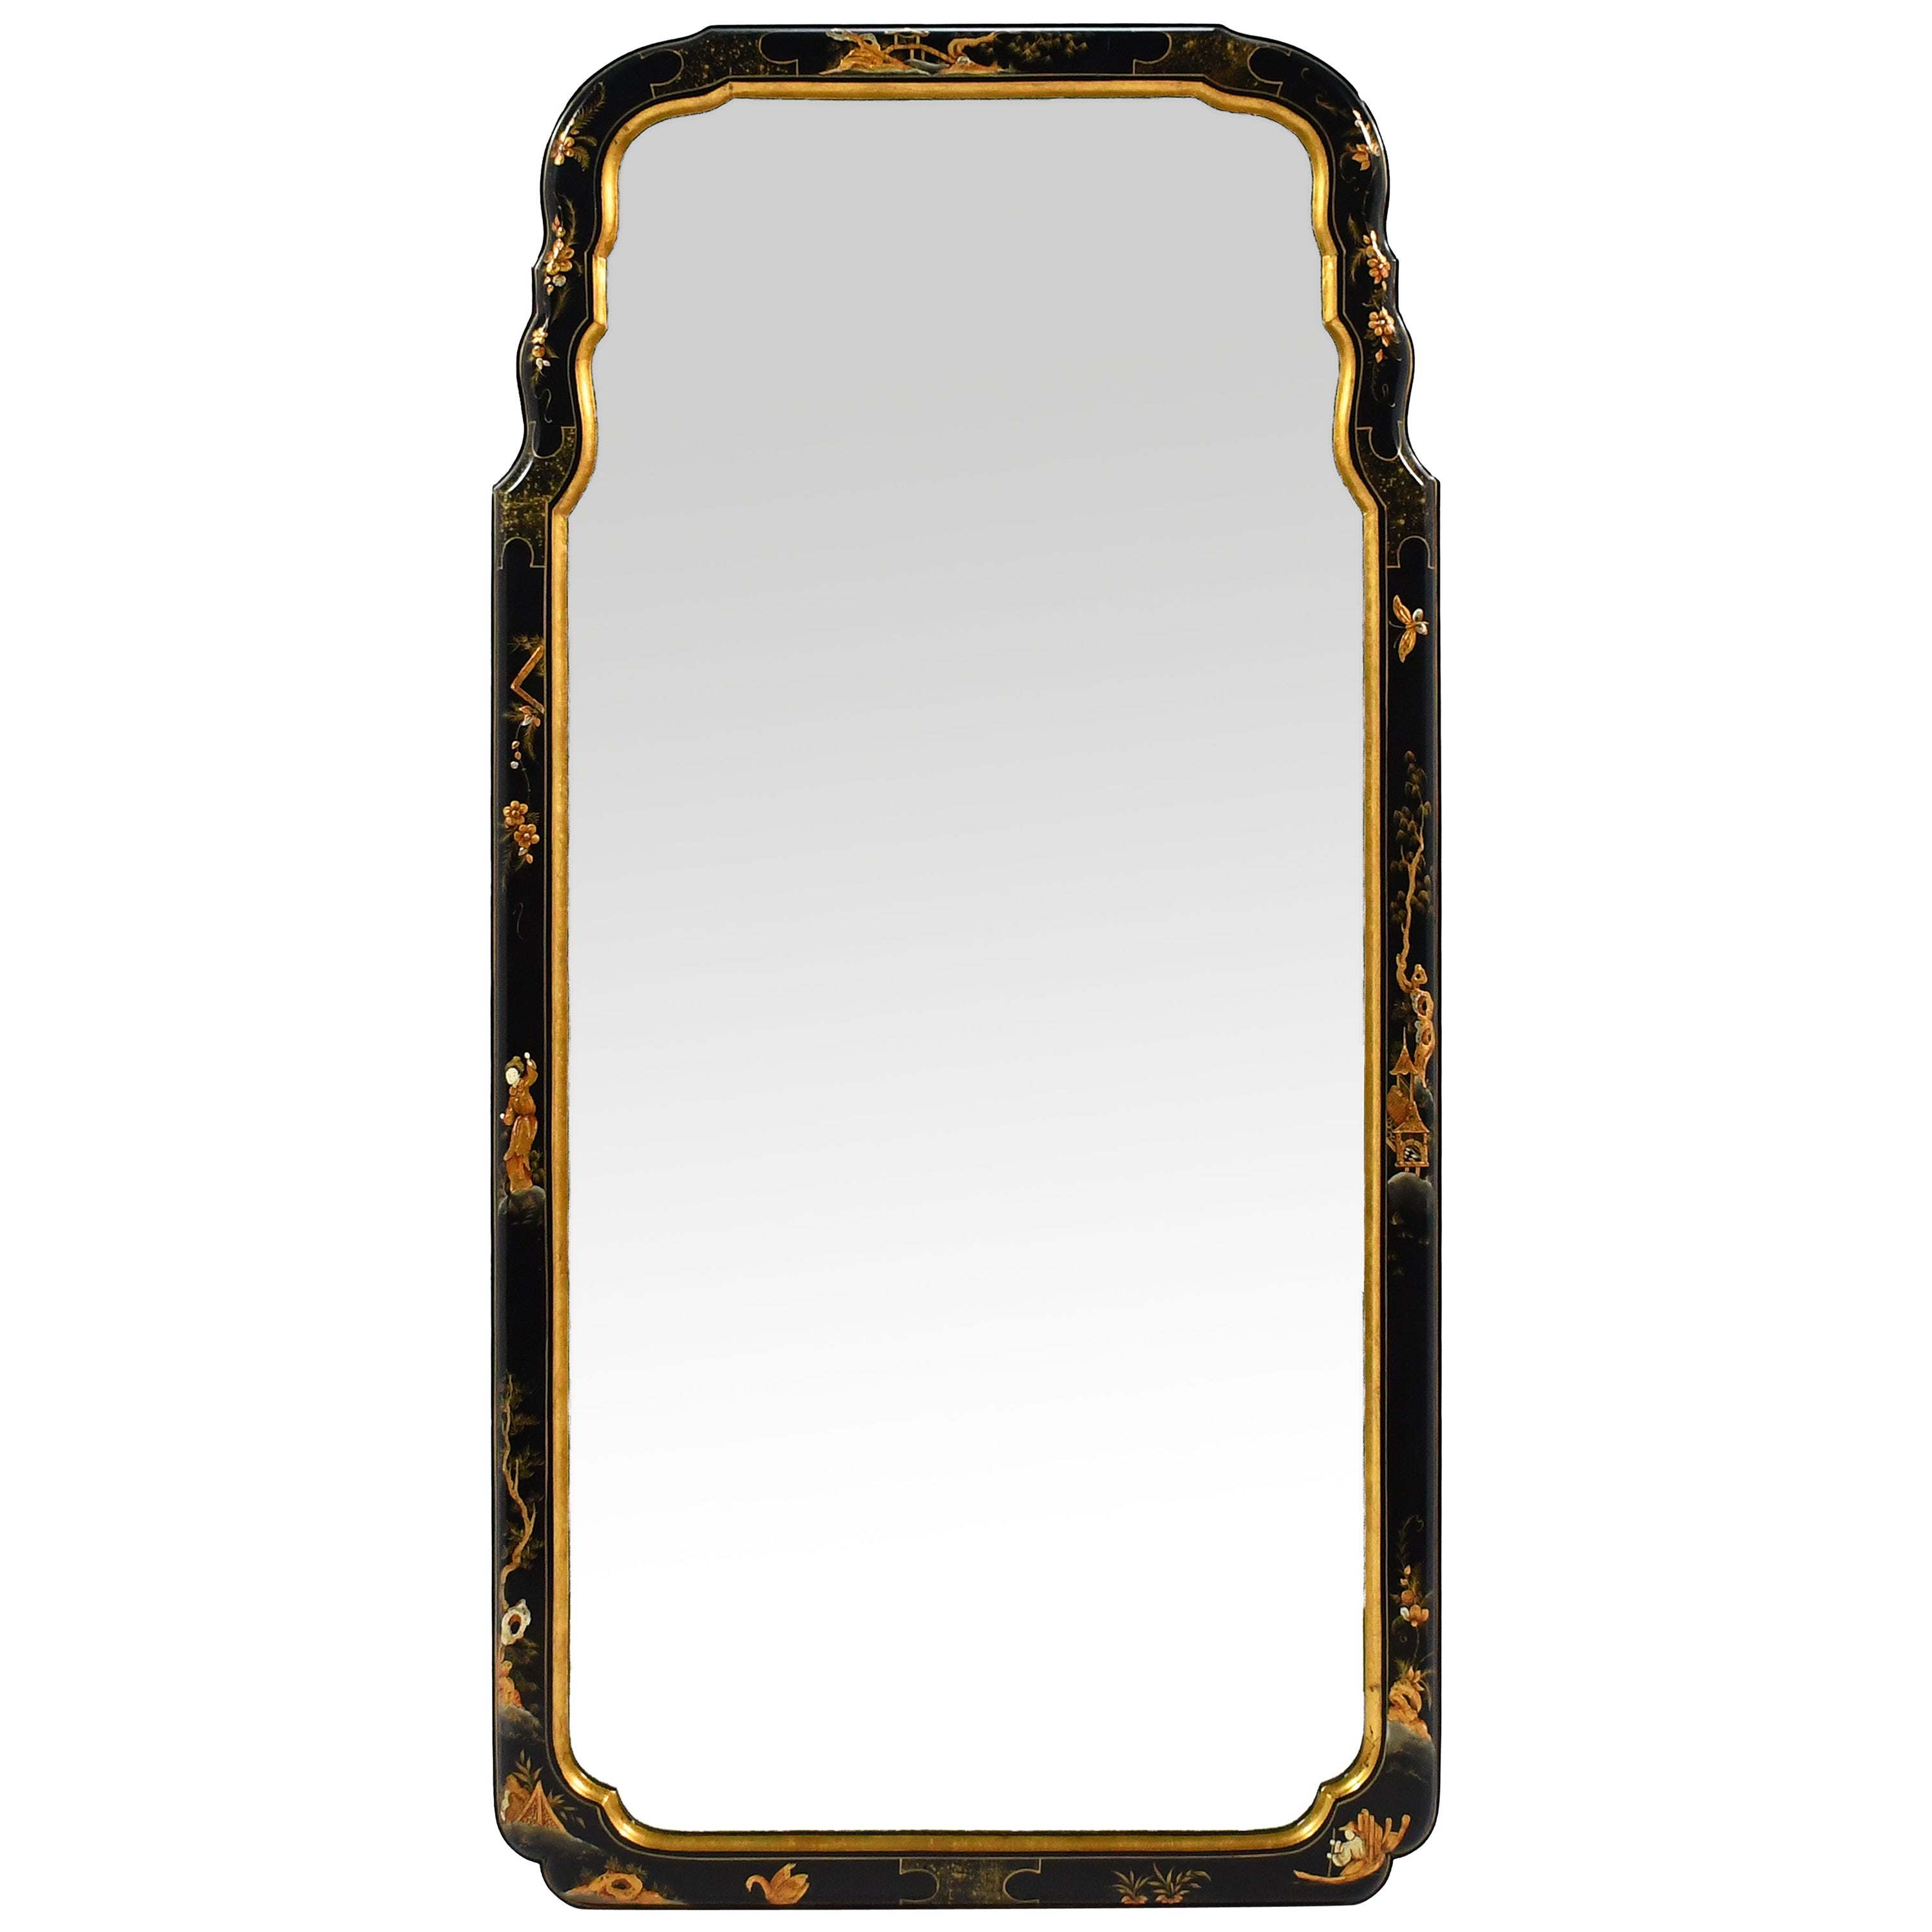 Baker Black Lacquer and Chinoiserie Framed Wall Mirror